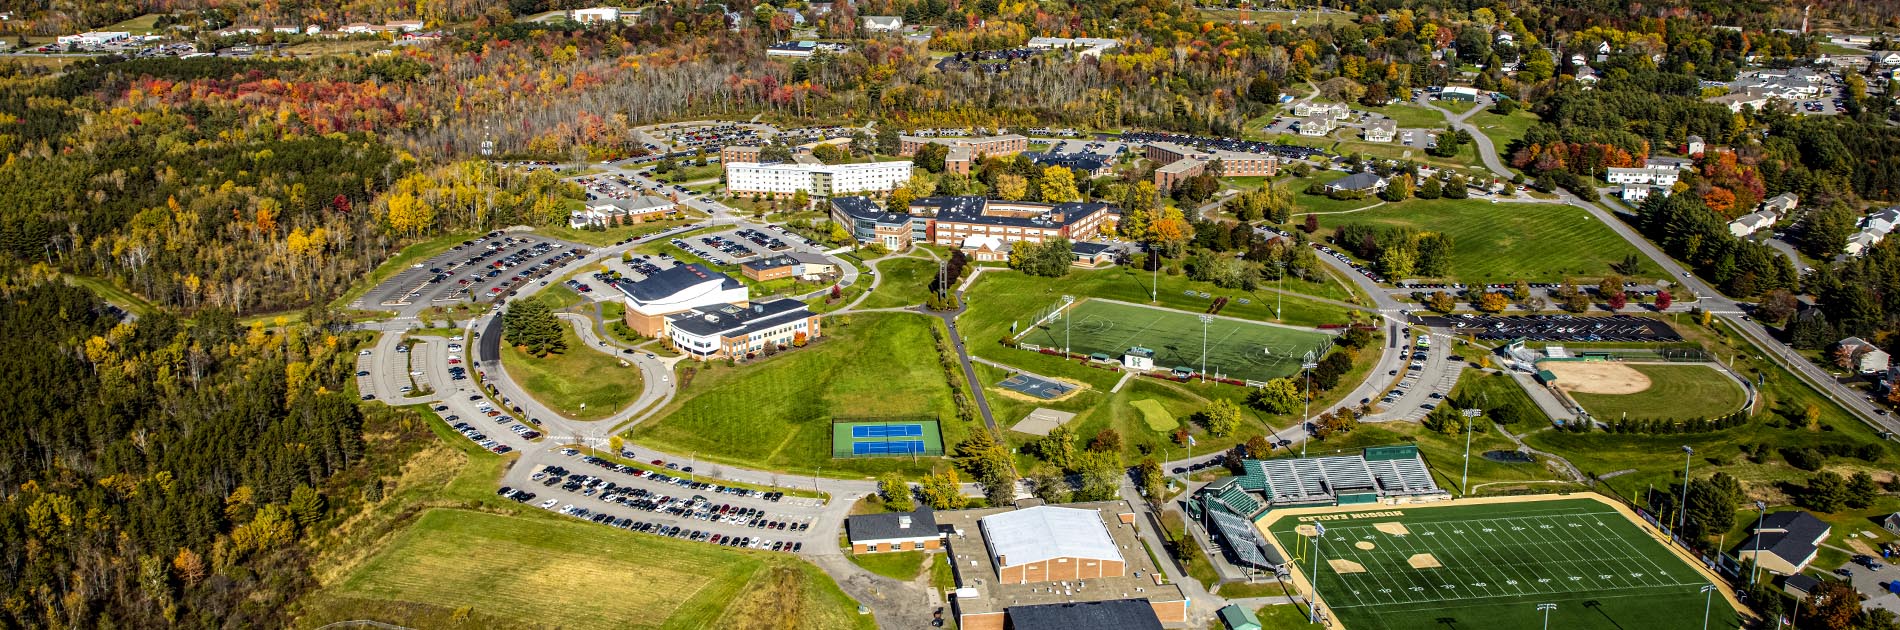 aerial image of the campus of Husson University